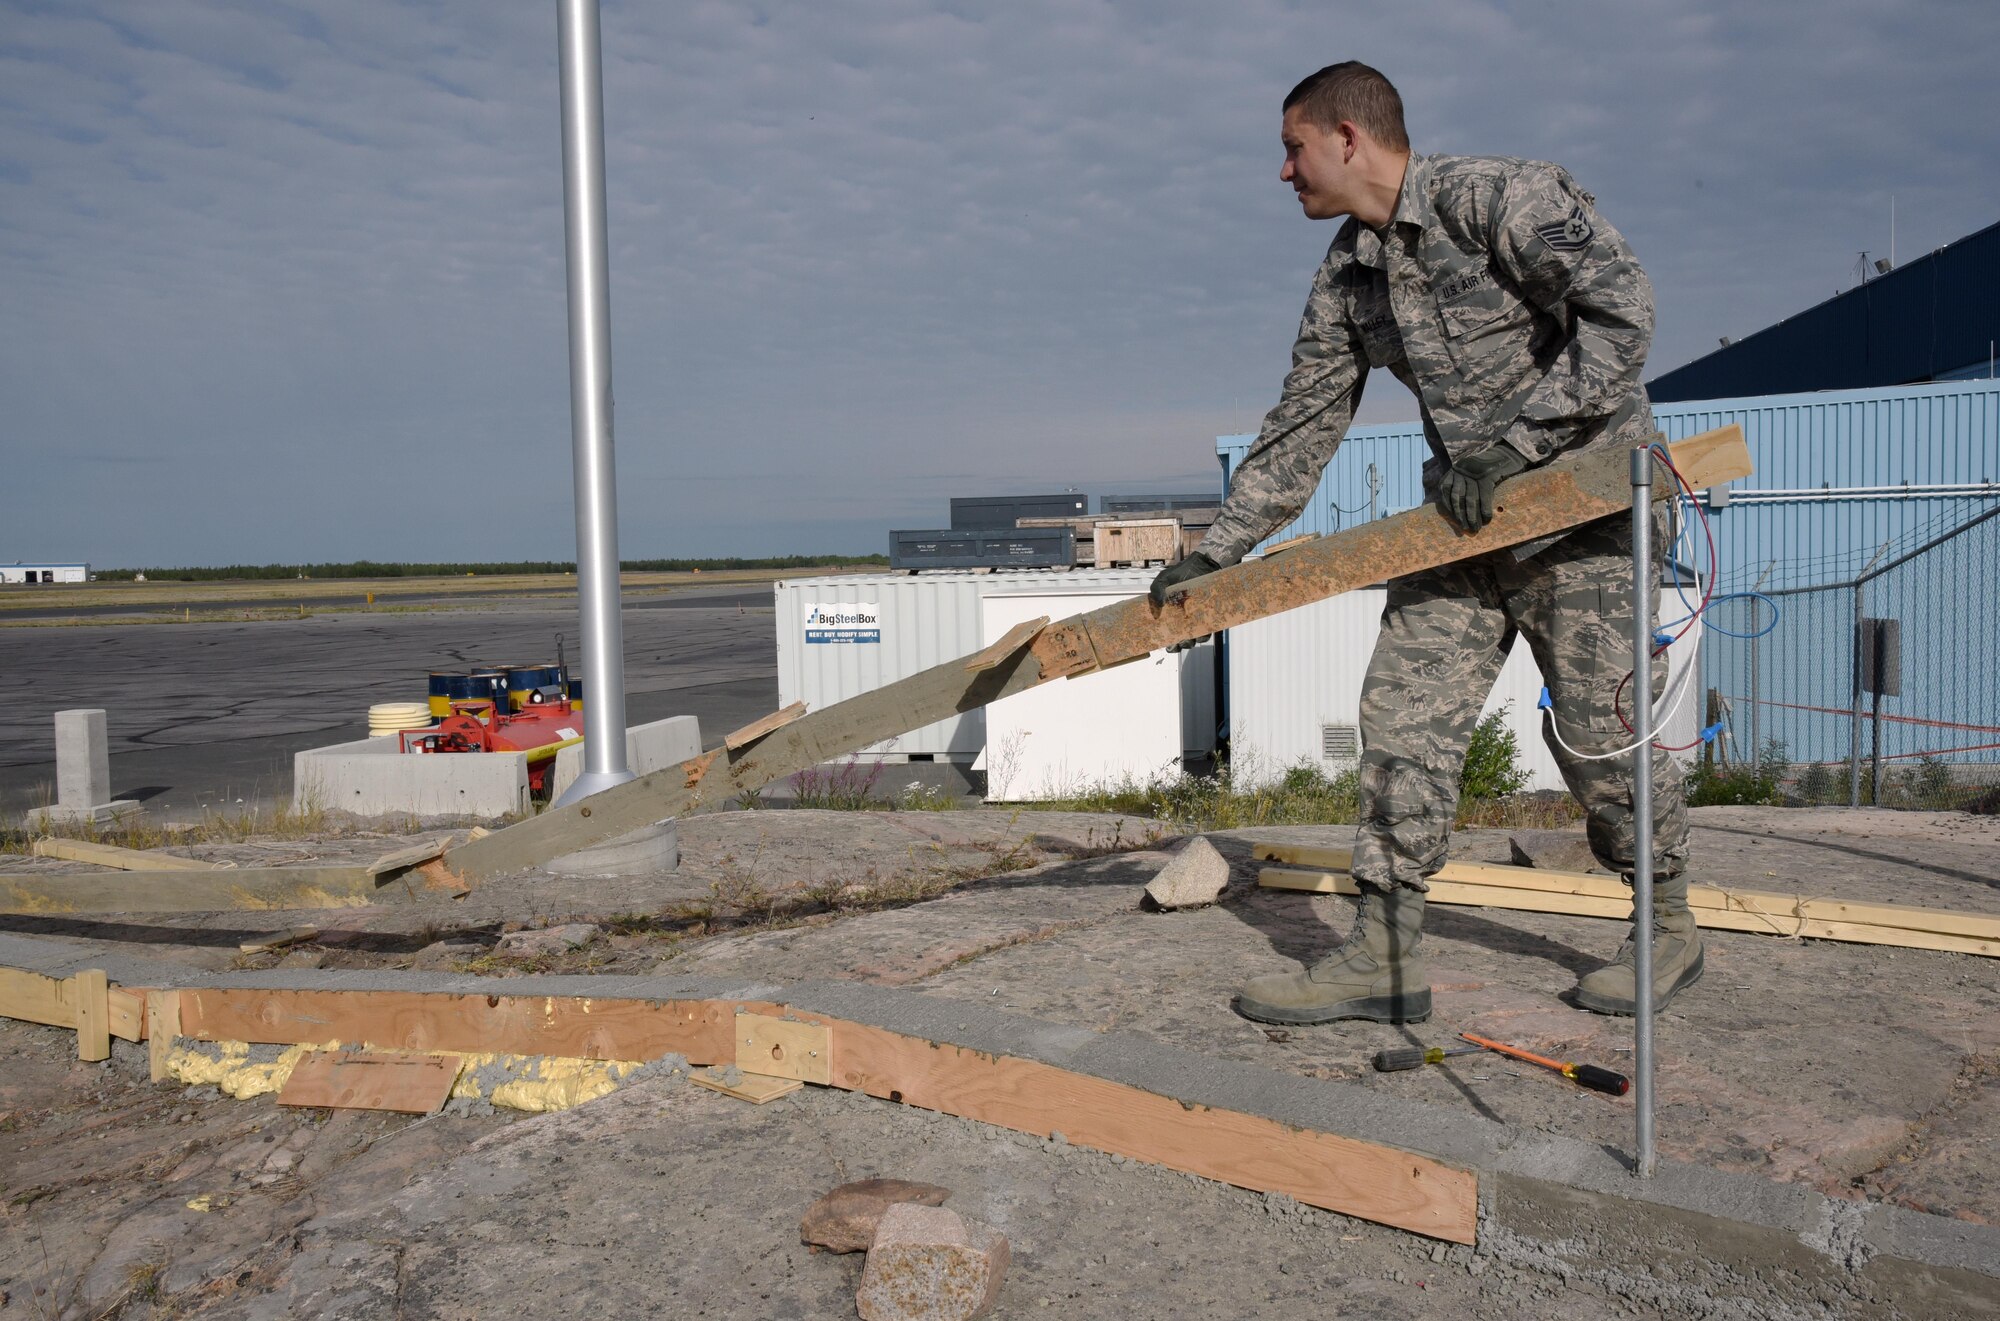 Oregon Air National Guard Staff Sgt. Christopher Walley, assigned to the 142nd Fighter Wing Civil Engineer Squadron (CES) removes wooden concrete forms as part of a lighting project at the 440th Squadron/Escadrille, Yellowknife, Northwest Territories, Canada, July 24, 2017. (U.S. Air National Guard photo/Master Sgt. John Hughel, 142nd Fighter Wing Public Affairs)